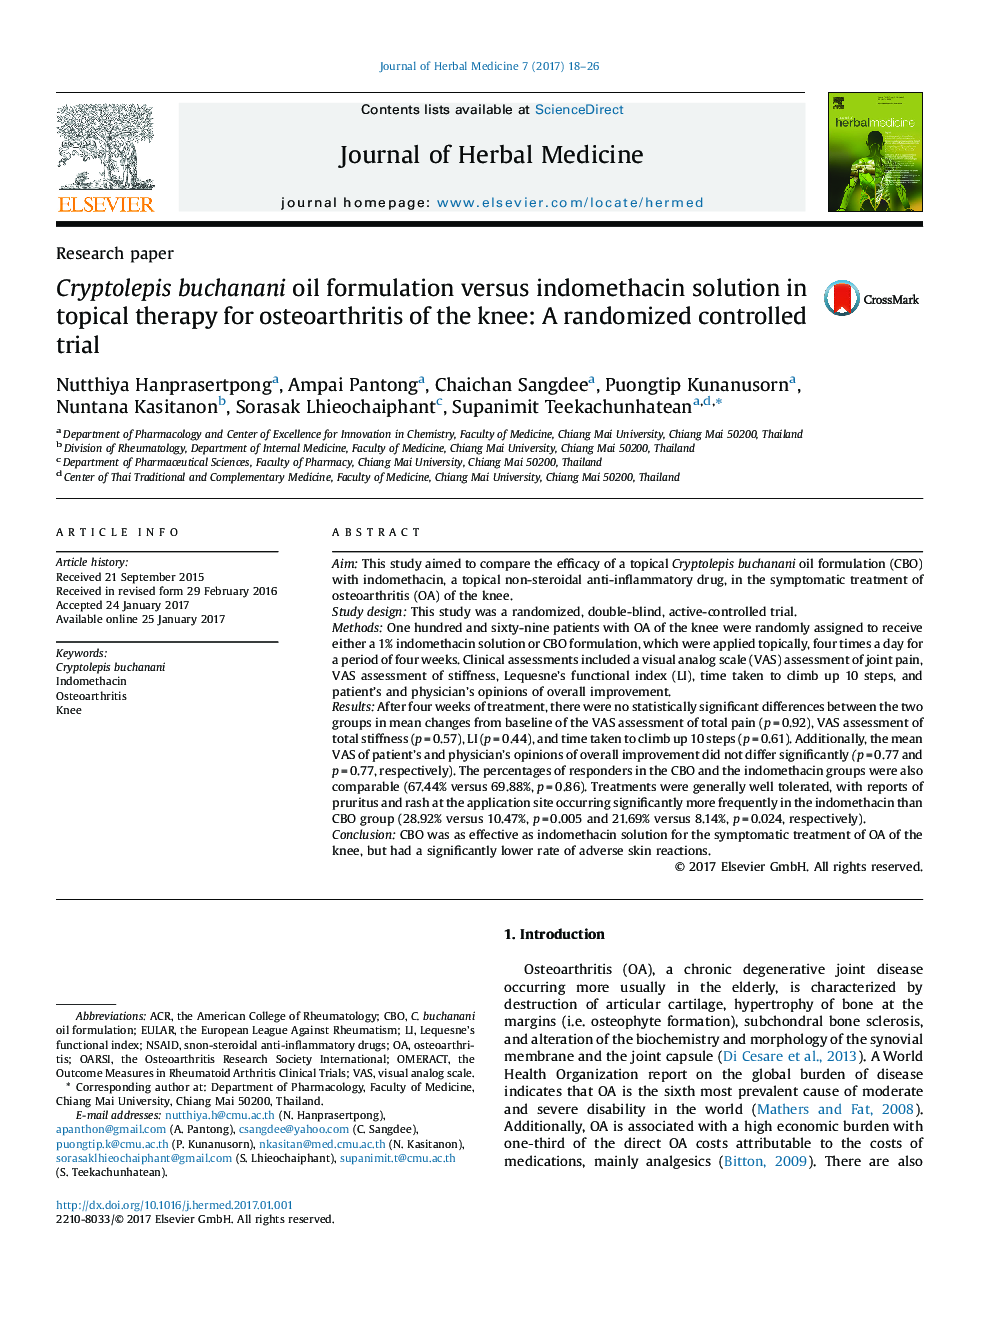 Cryptolepis buchanani oil formulation versus indomethacin solution in topical therapy for osteoarthritis of the knee: A randomized controlled trial